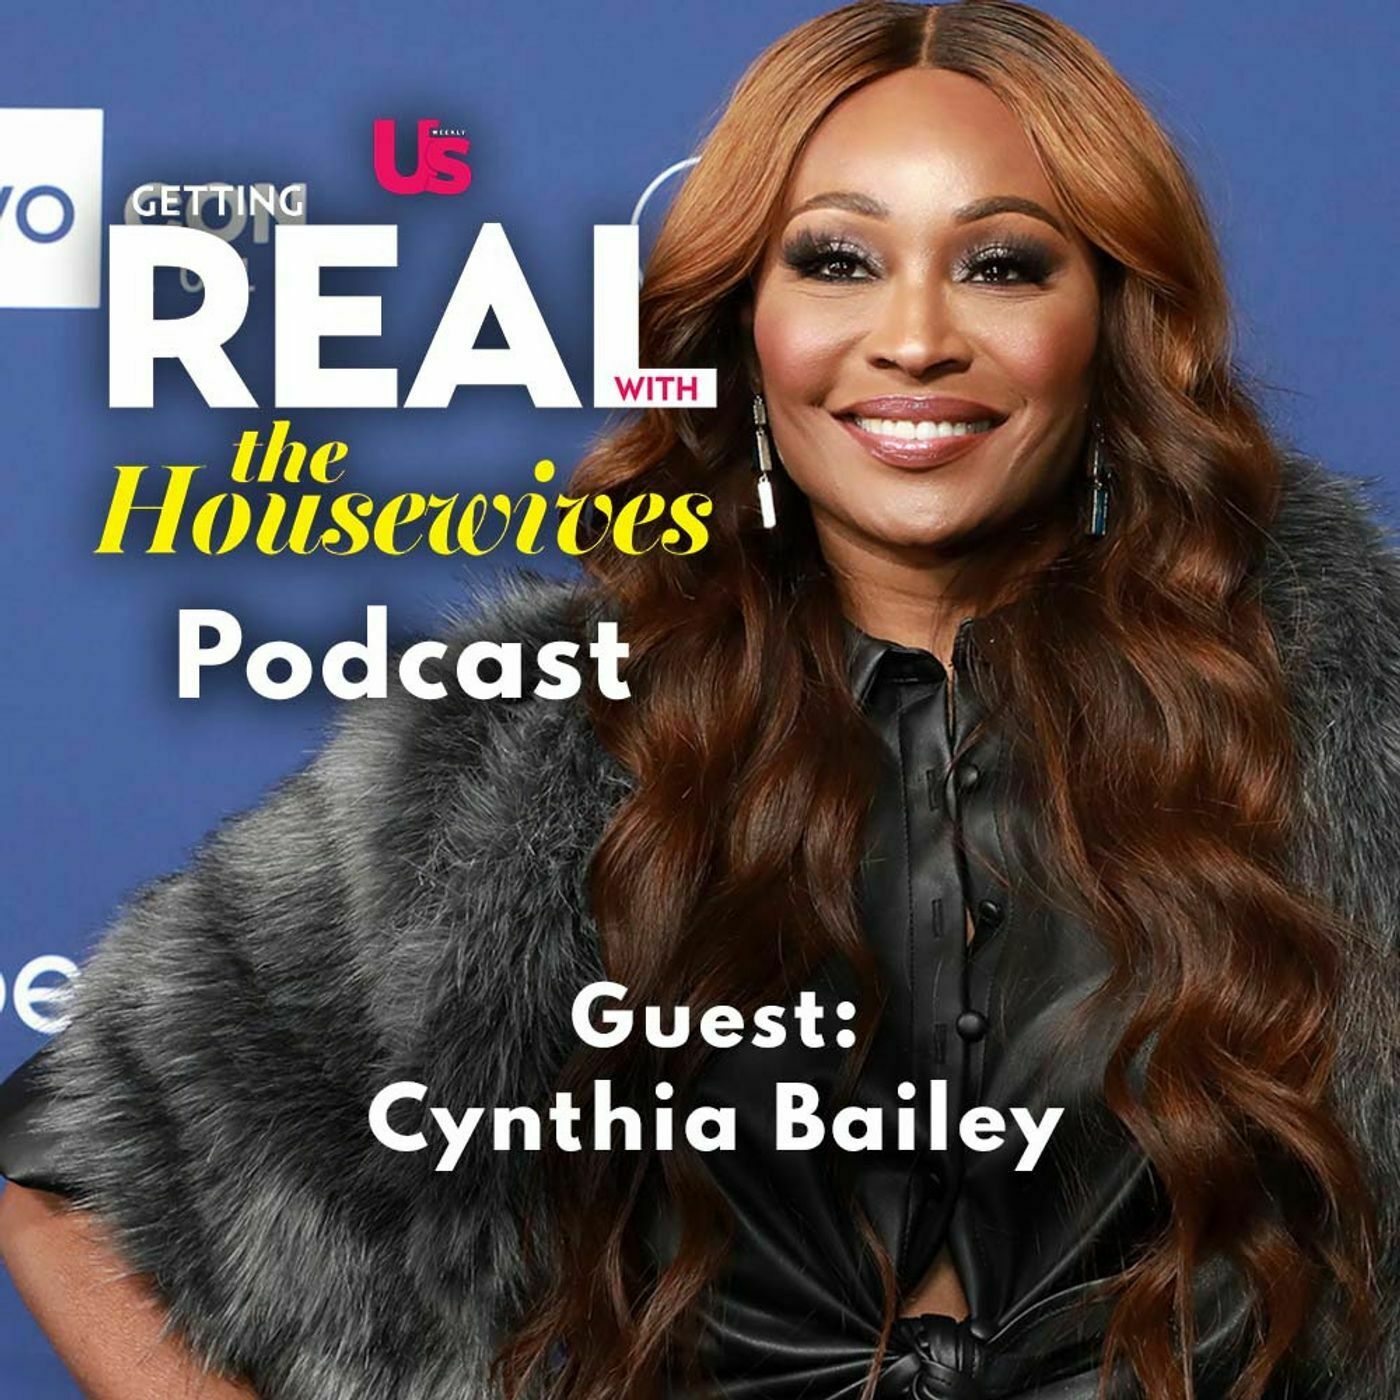 Cynthia Bailey Bonded With Teresa Giudice on ‘Ultimate Girls Trip’ After Asking Her About Jail